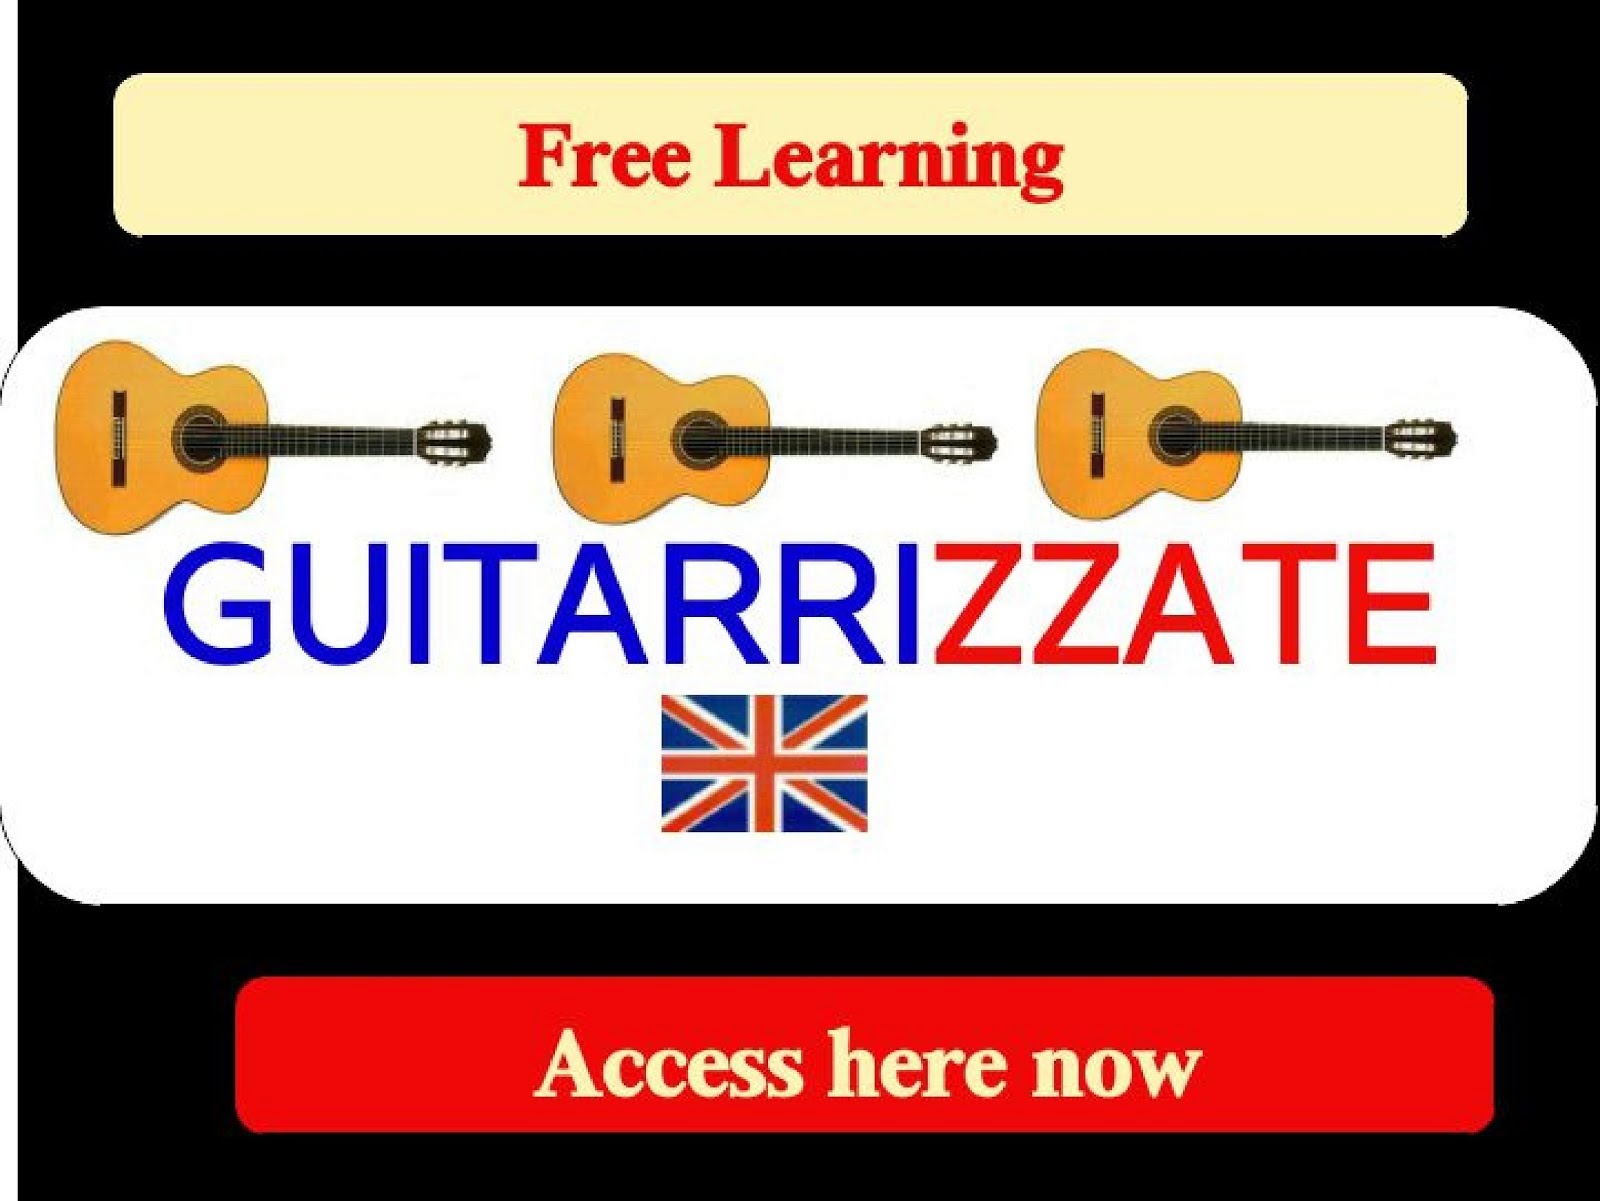 GUITARRIZZATE access now, Free Learning by Musizzate